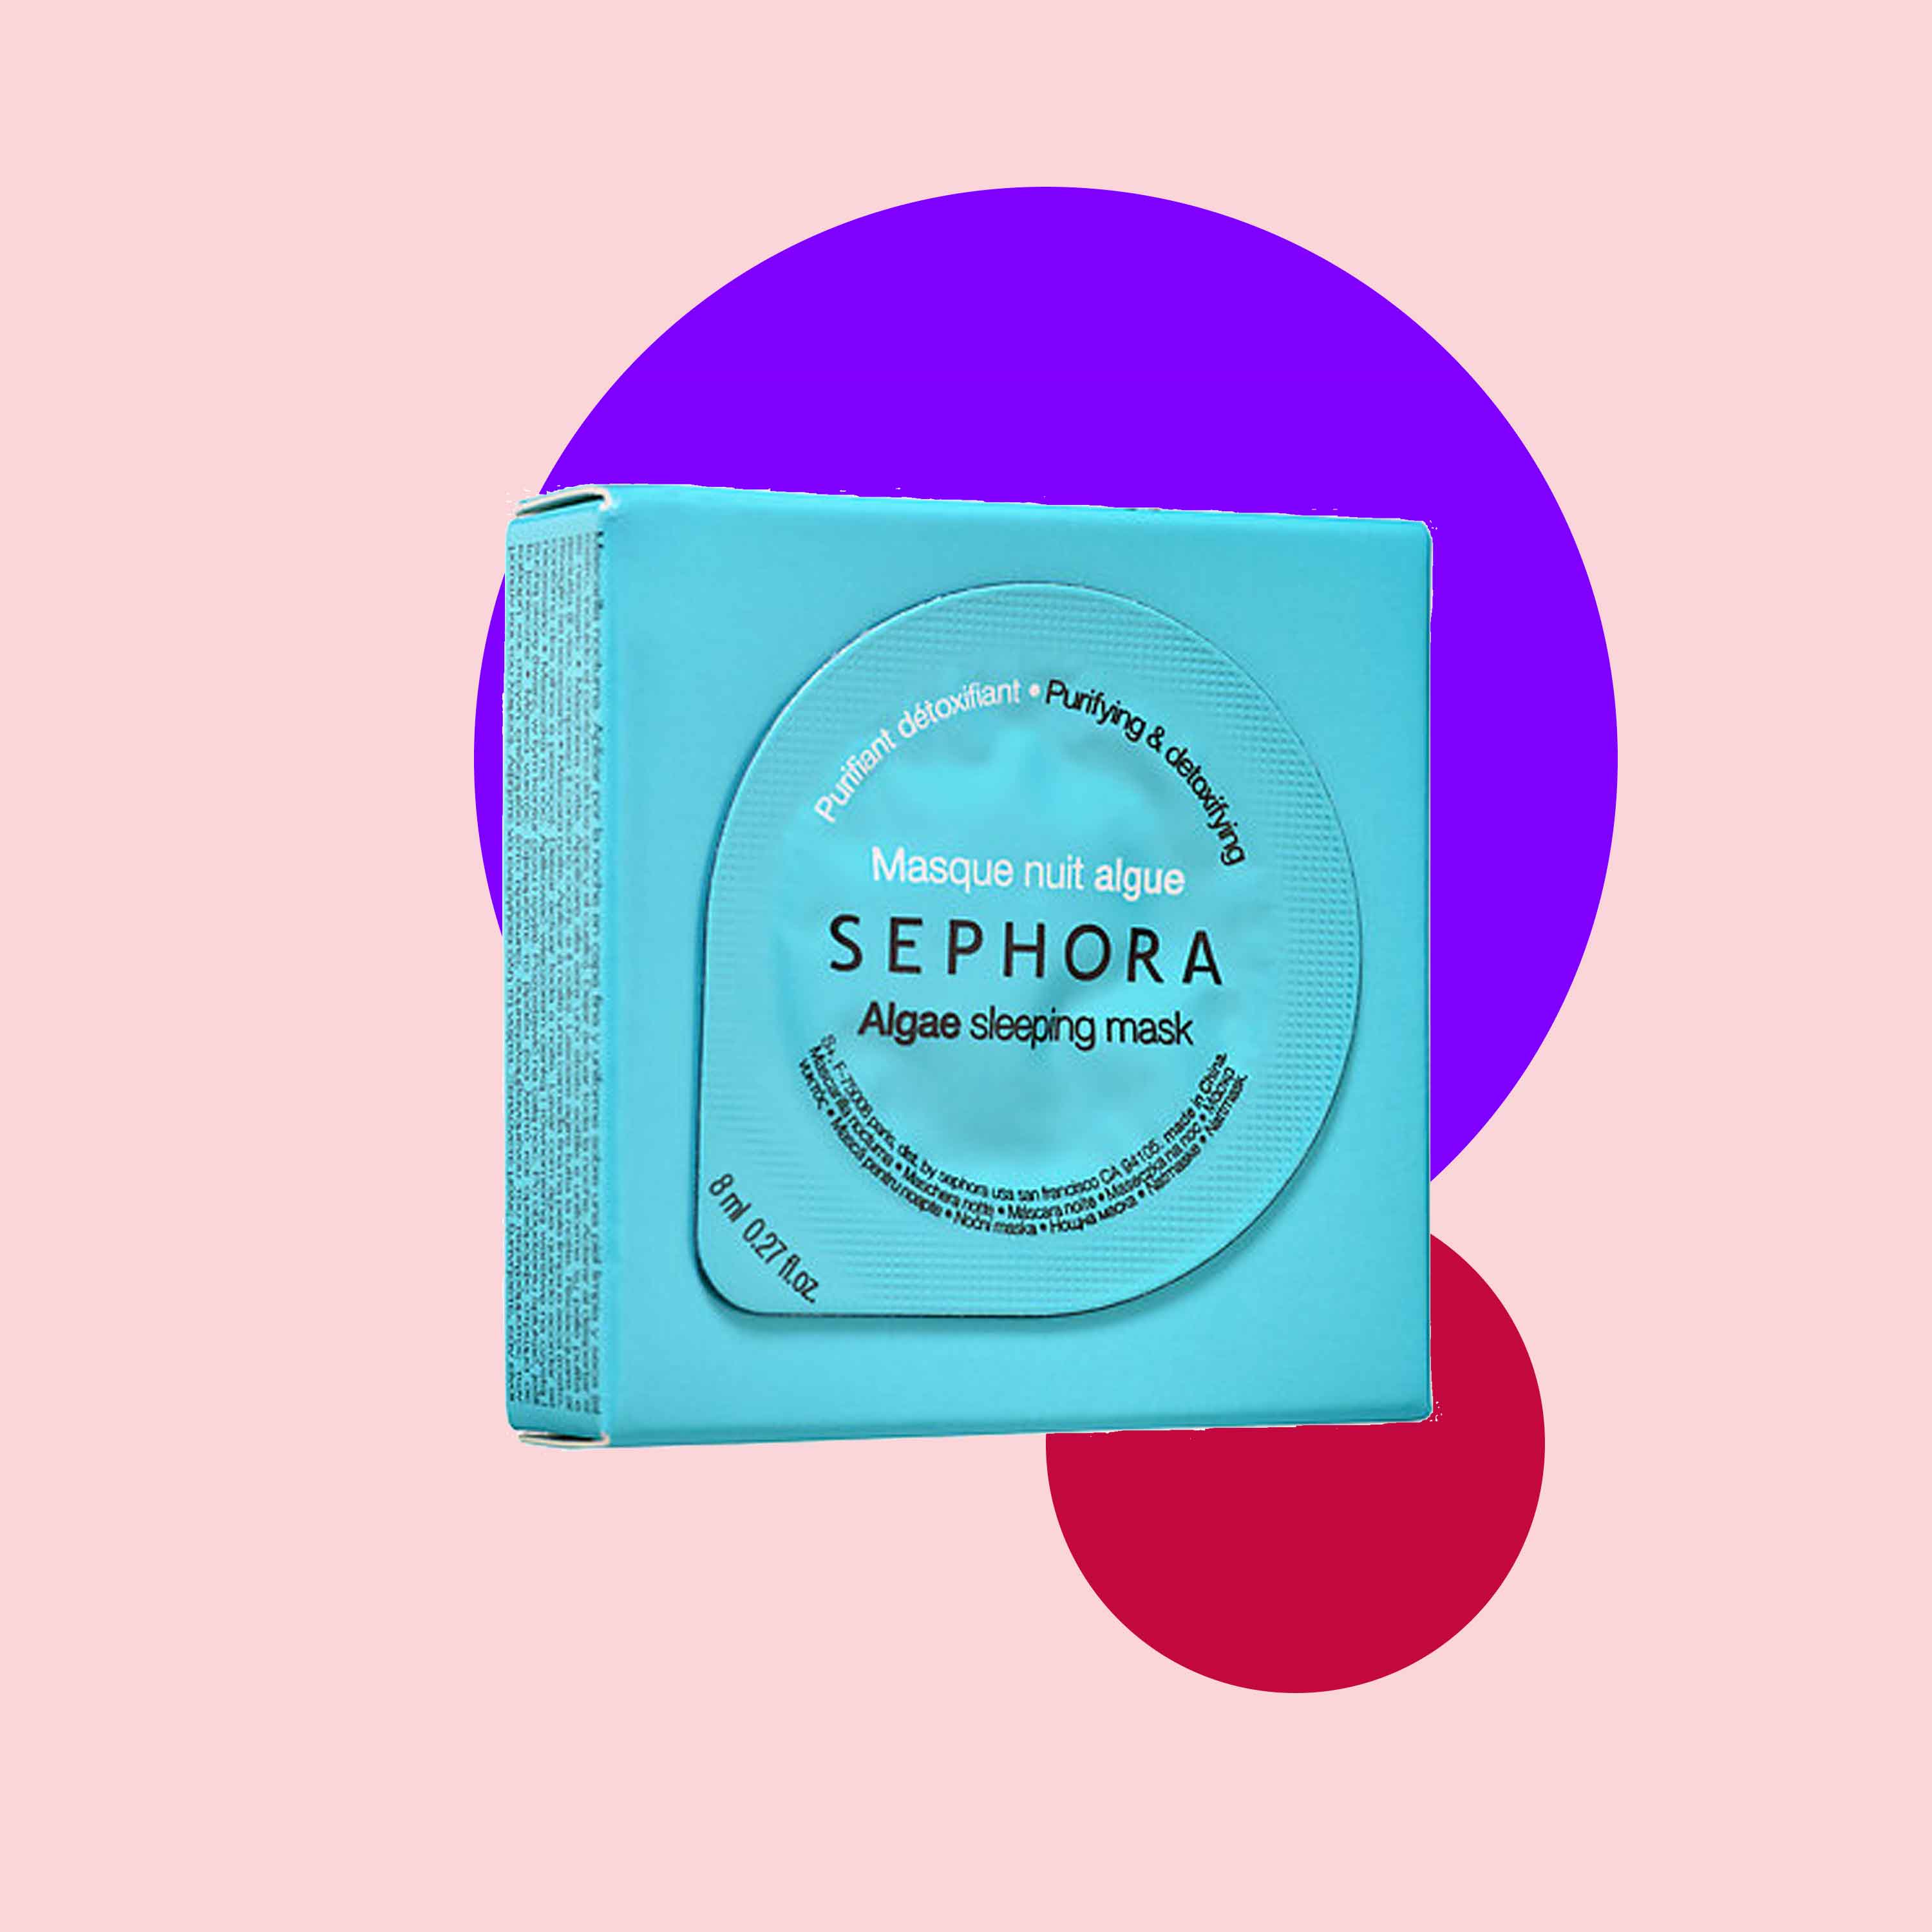 10 Tiny Face Masks That TSA Won't Confiscate From Your Carry-On
